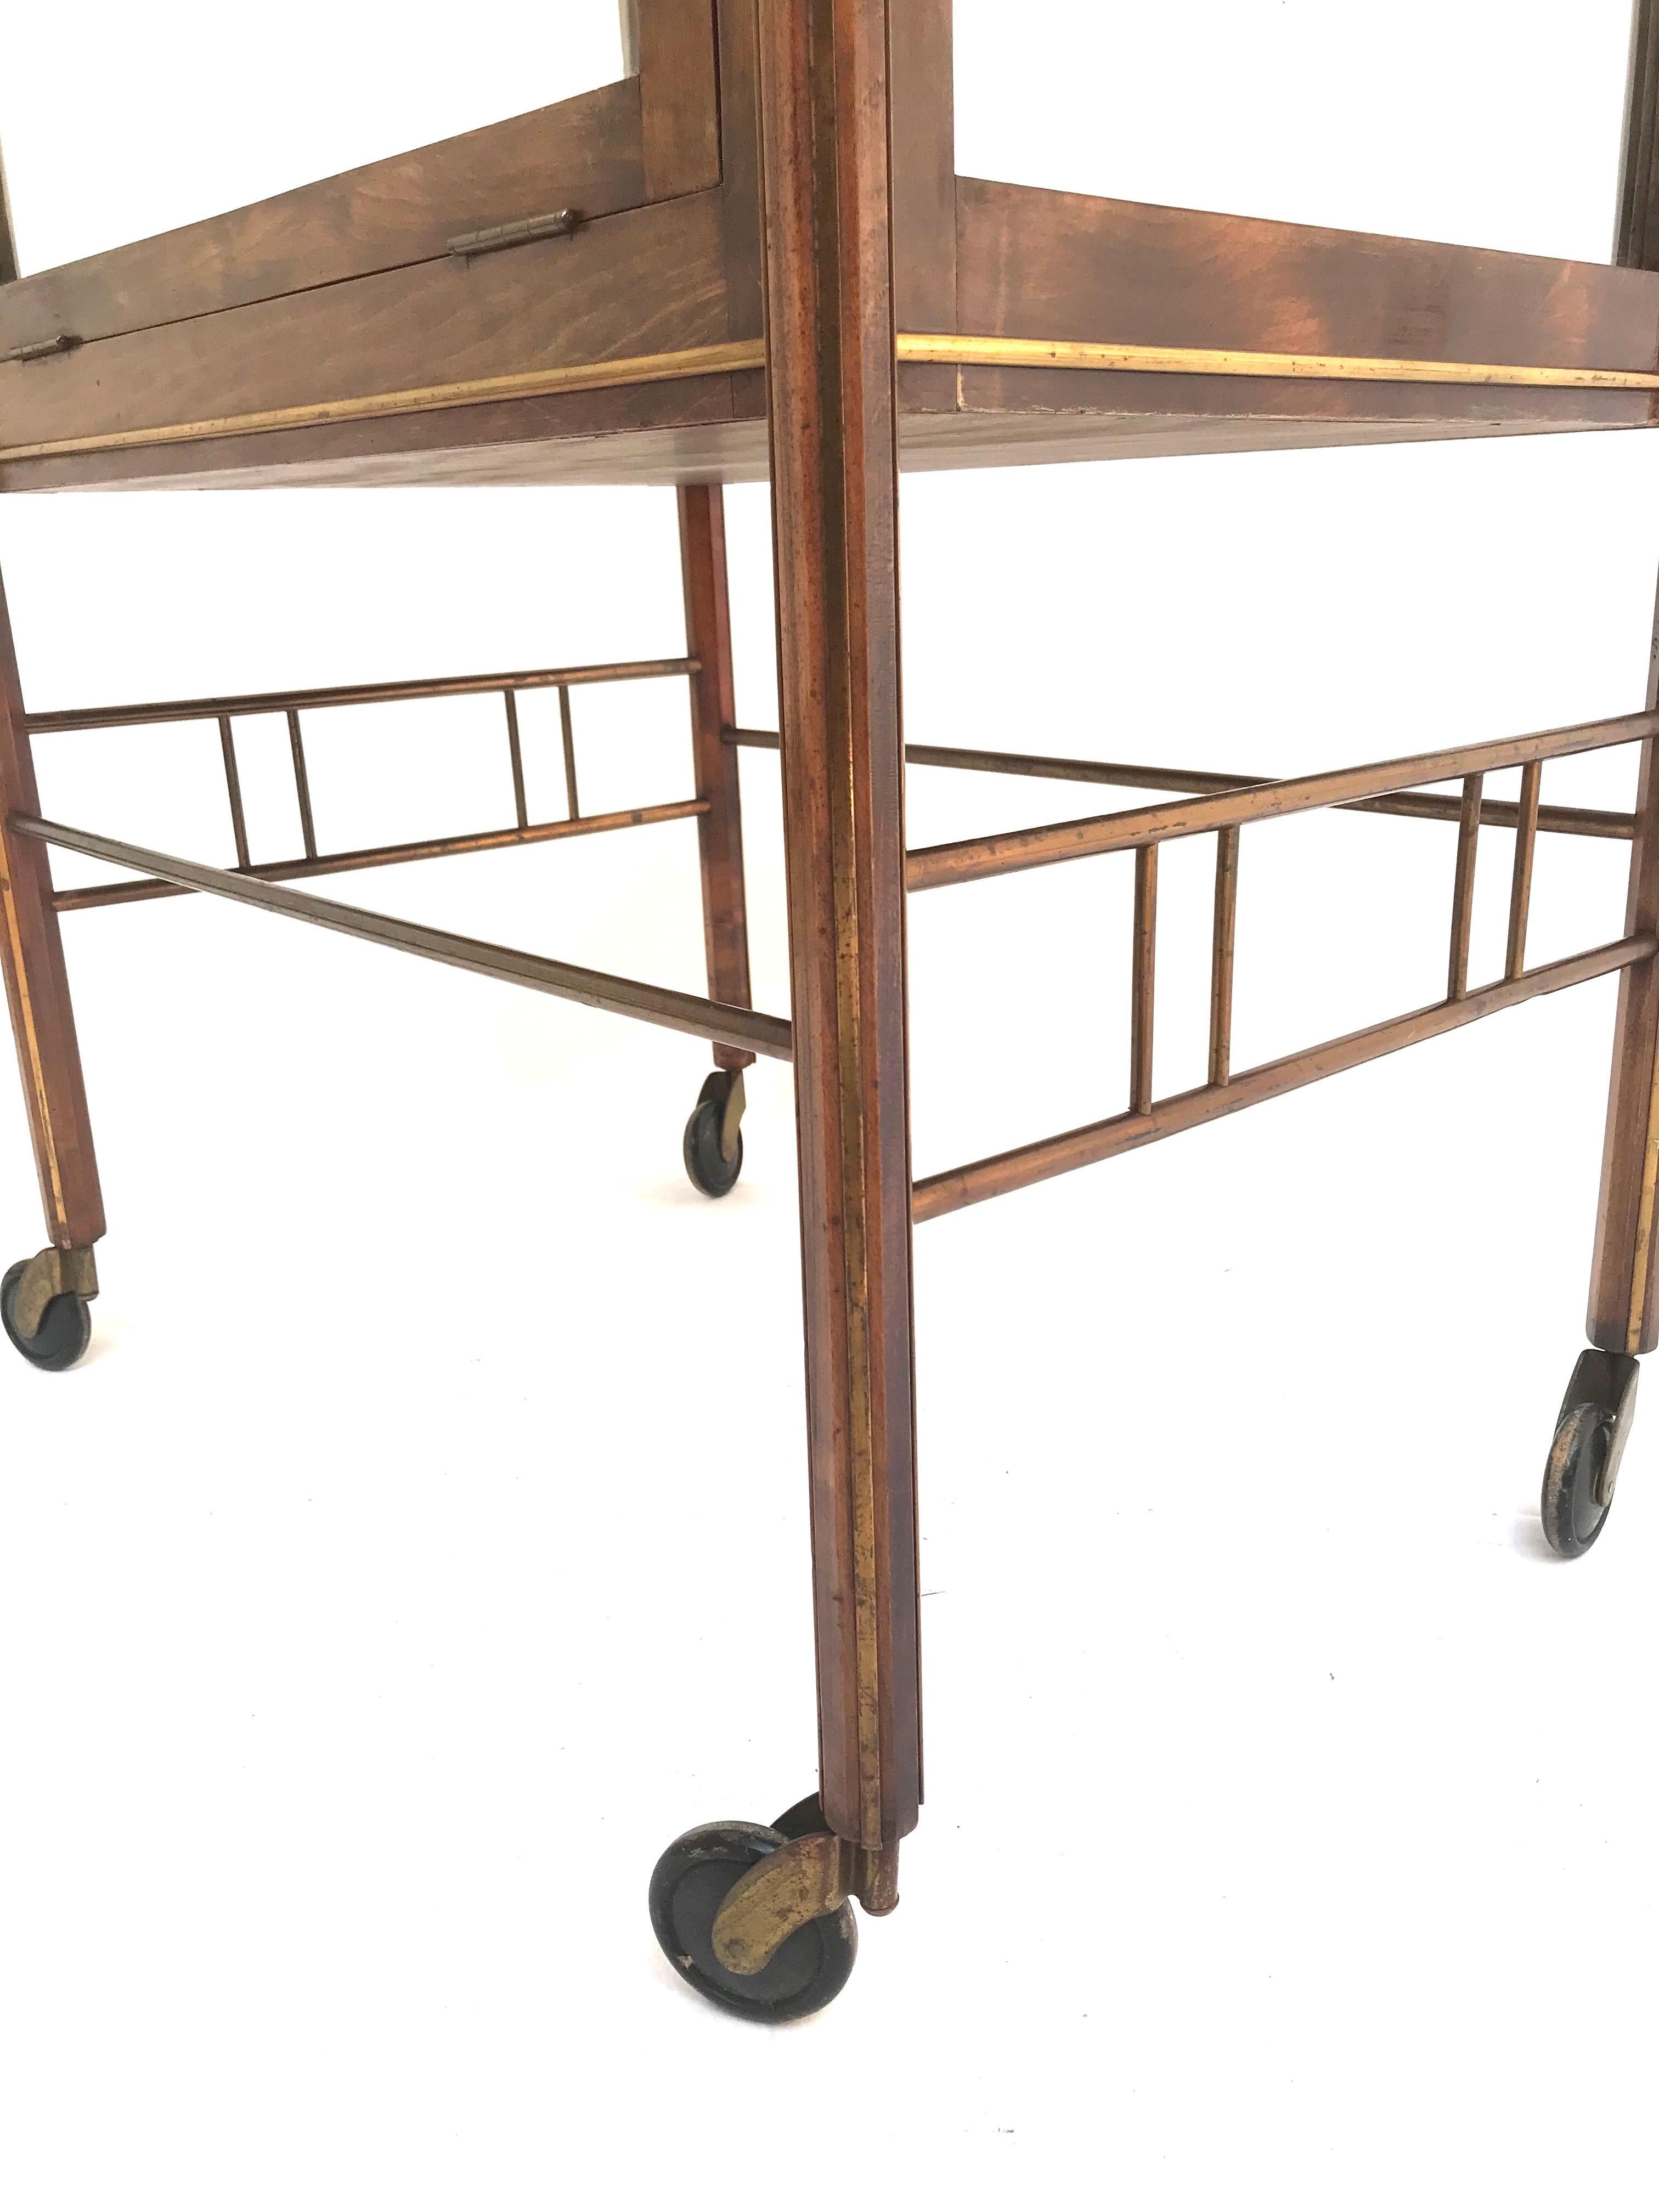 Stunning Asymmetrical Arts & Crafts Wood, Brass & Glass Drinks Trolley or Cart For Sale 1